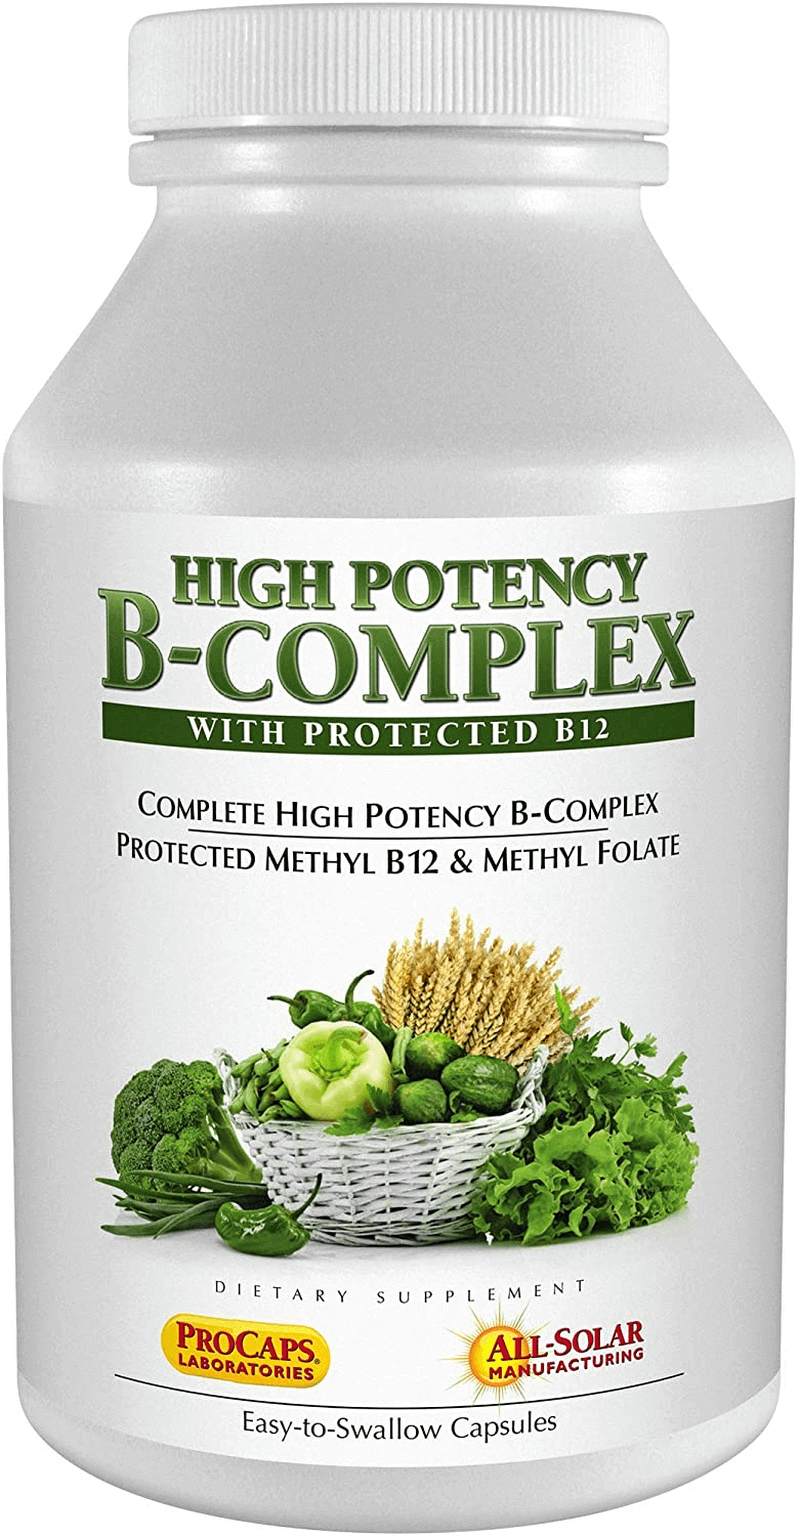 Andrew Lessman High Potency B-Complex 60 Capsules - with High Levels of Folate Complex & Biotin, Promotes Cellular Growth, Energy, Immune Function, Detoxification, Fat Metabolism & More - vitamenstore.com